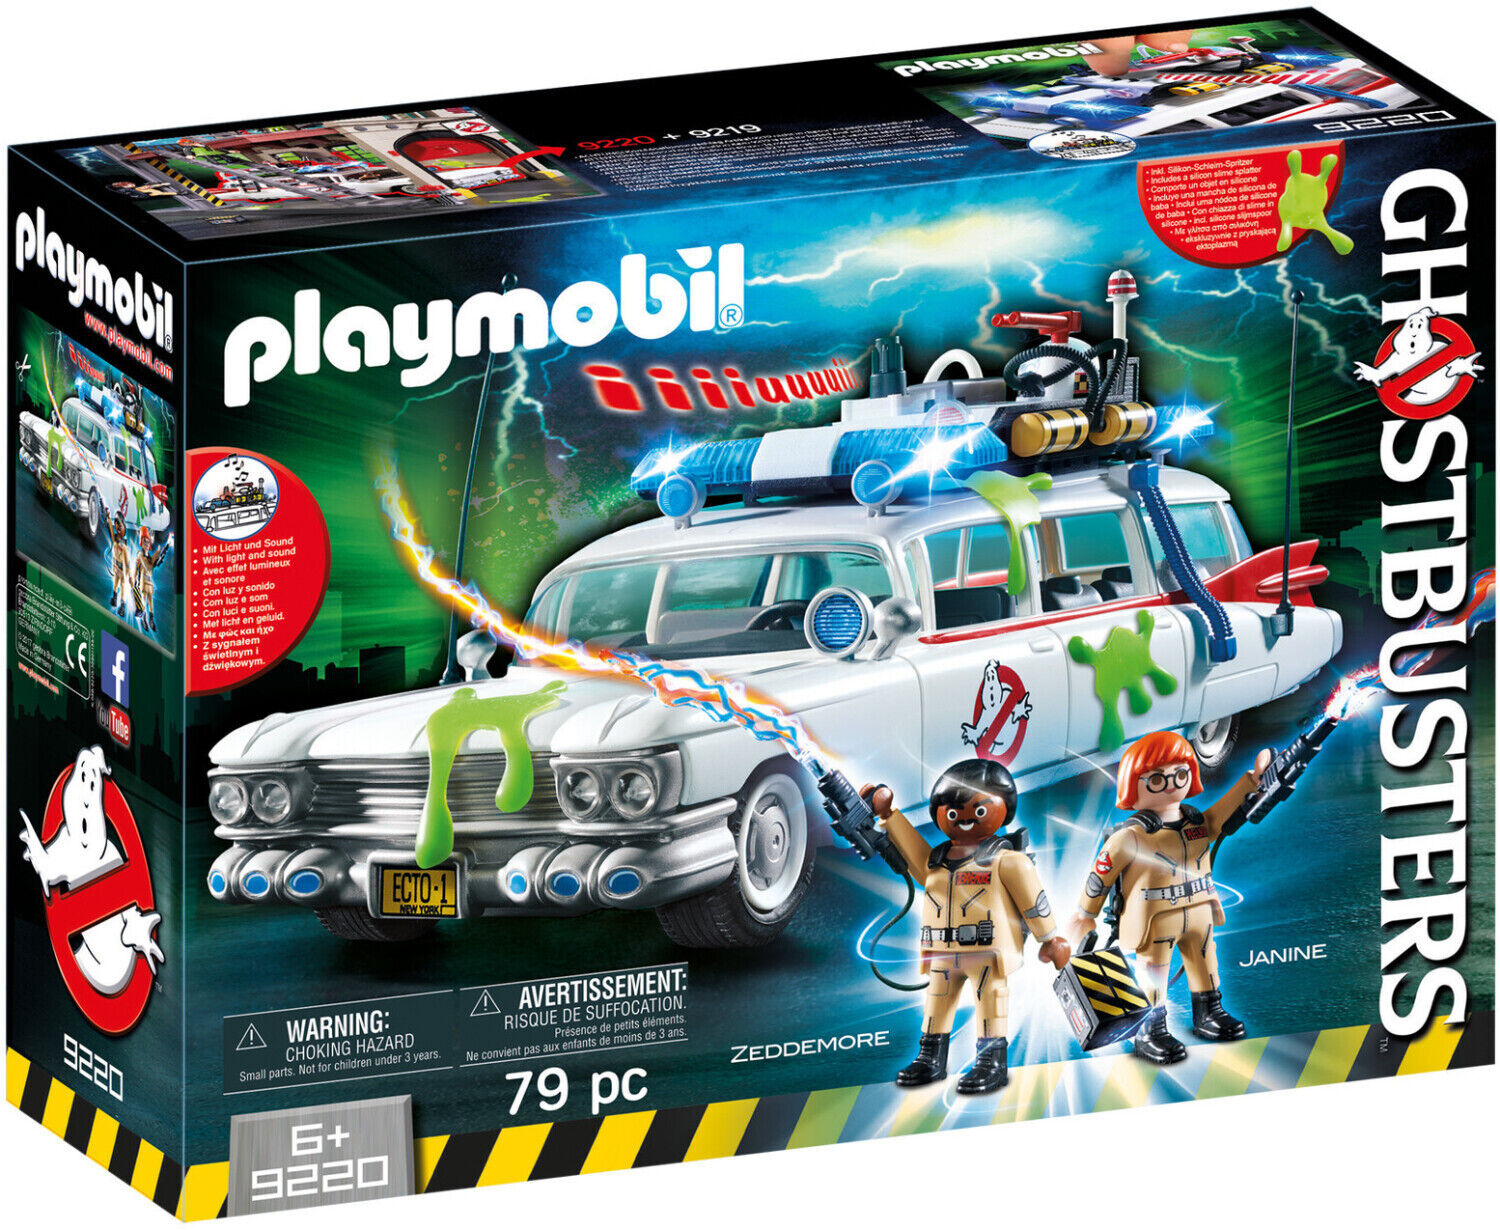 Playmobil 70175 Ghostbusters 4 Characters Collector's Set